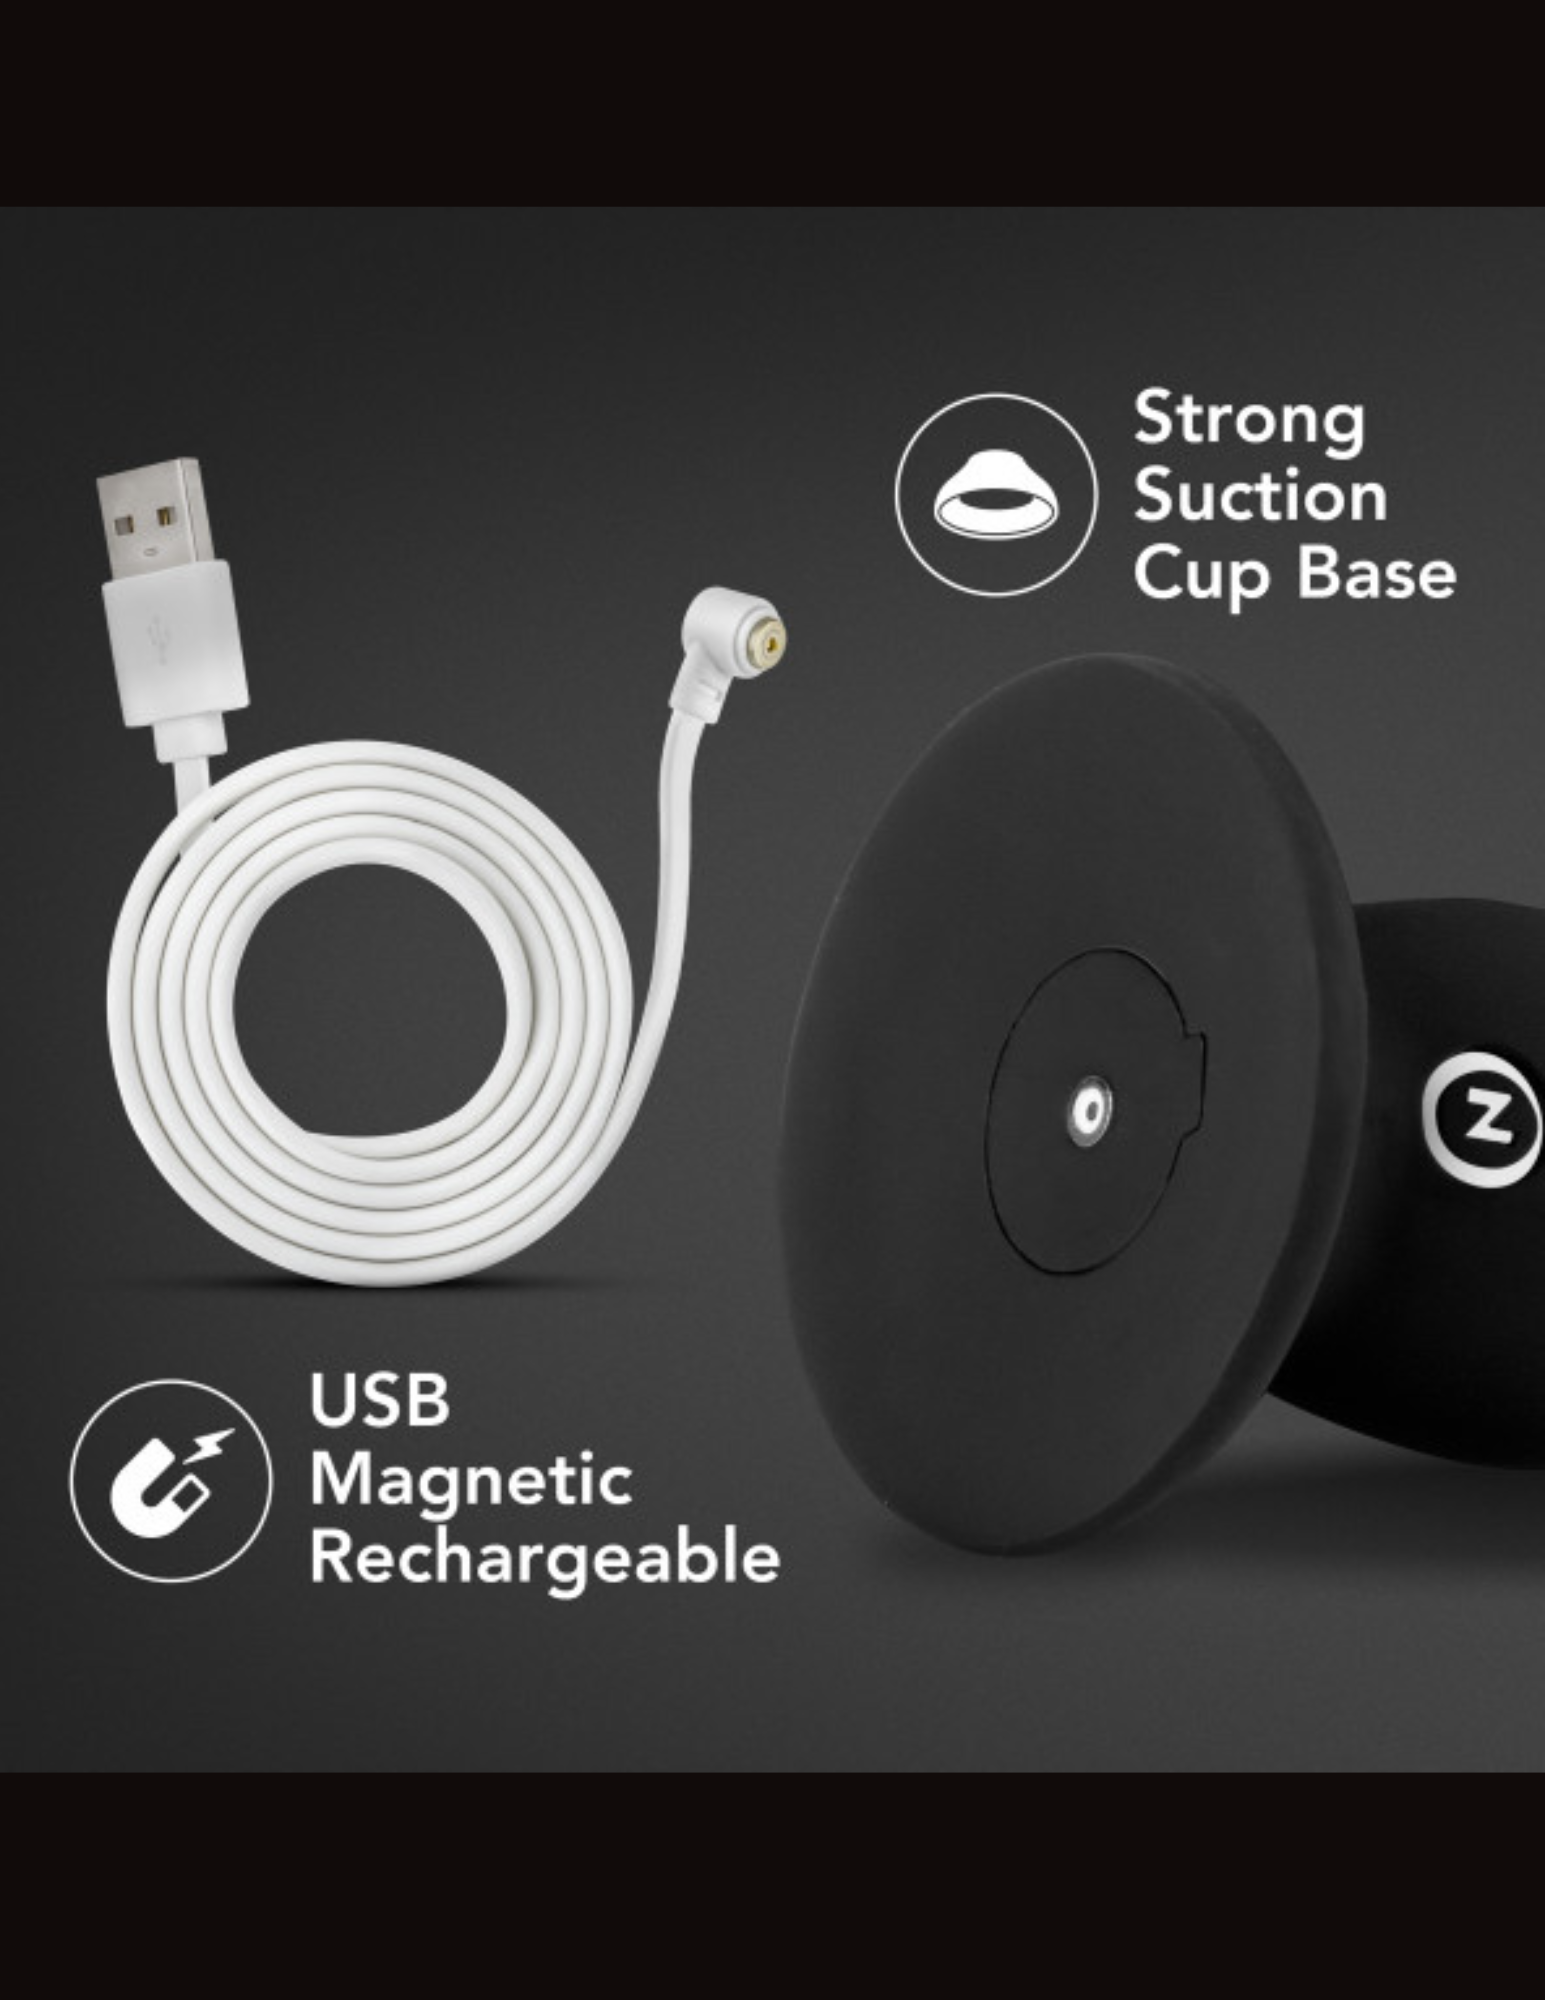 Image features the USB magnetic charging cord that comes with the Impressions Amsterdam Vibrator from Blush (black).